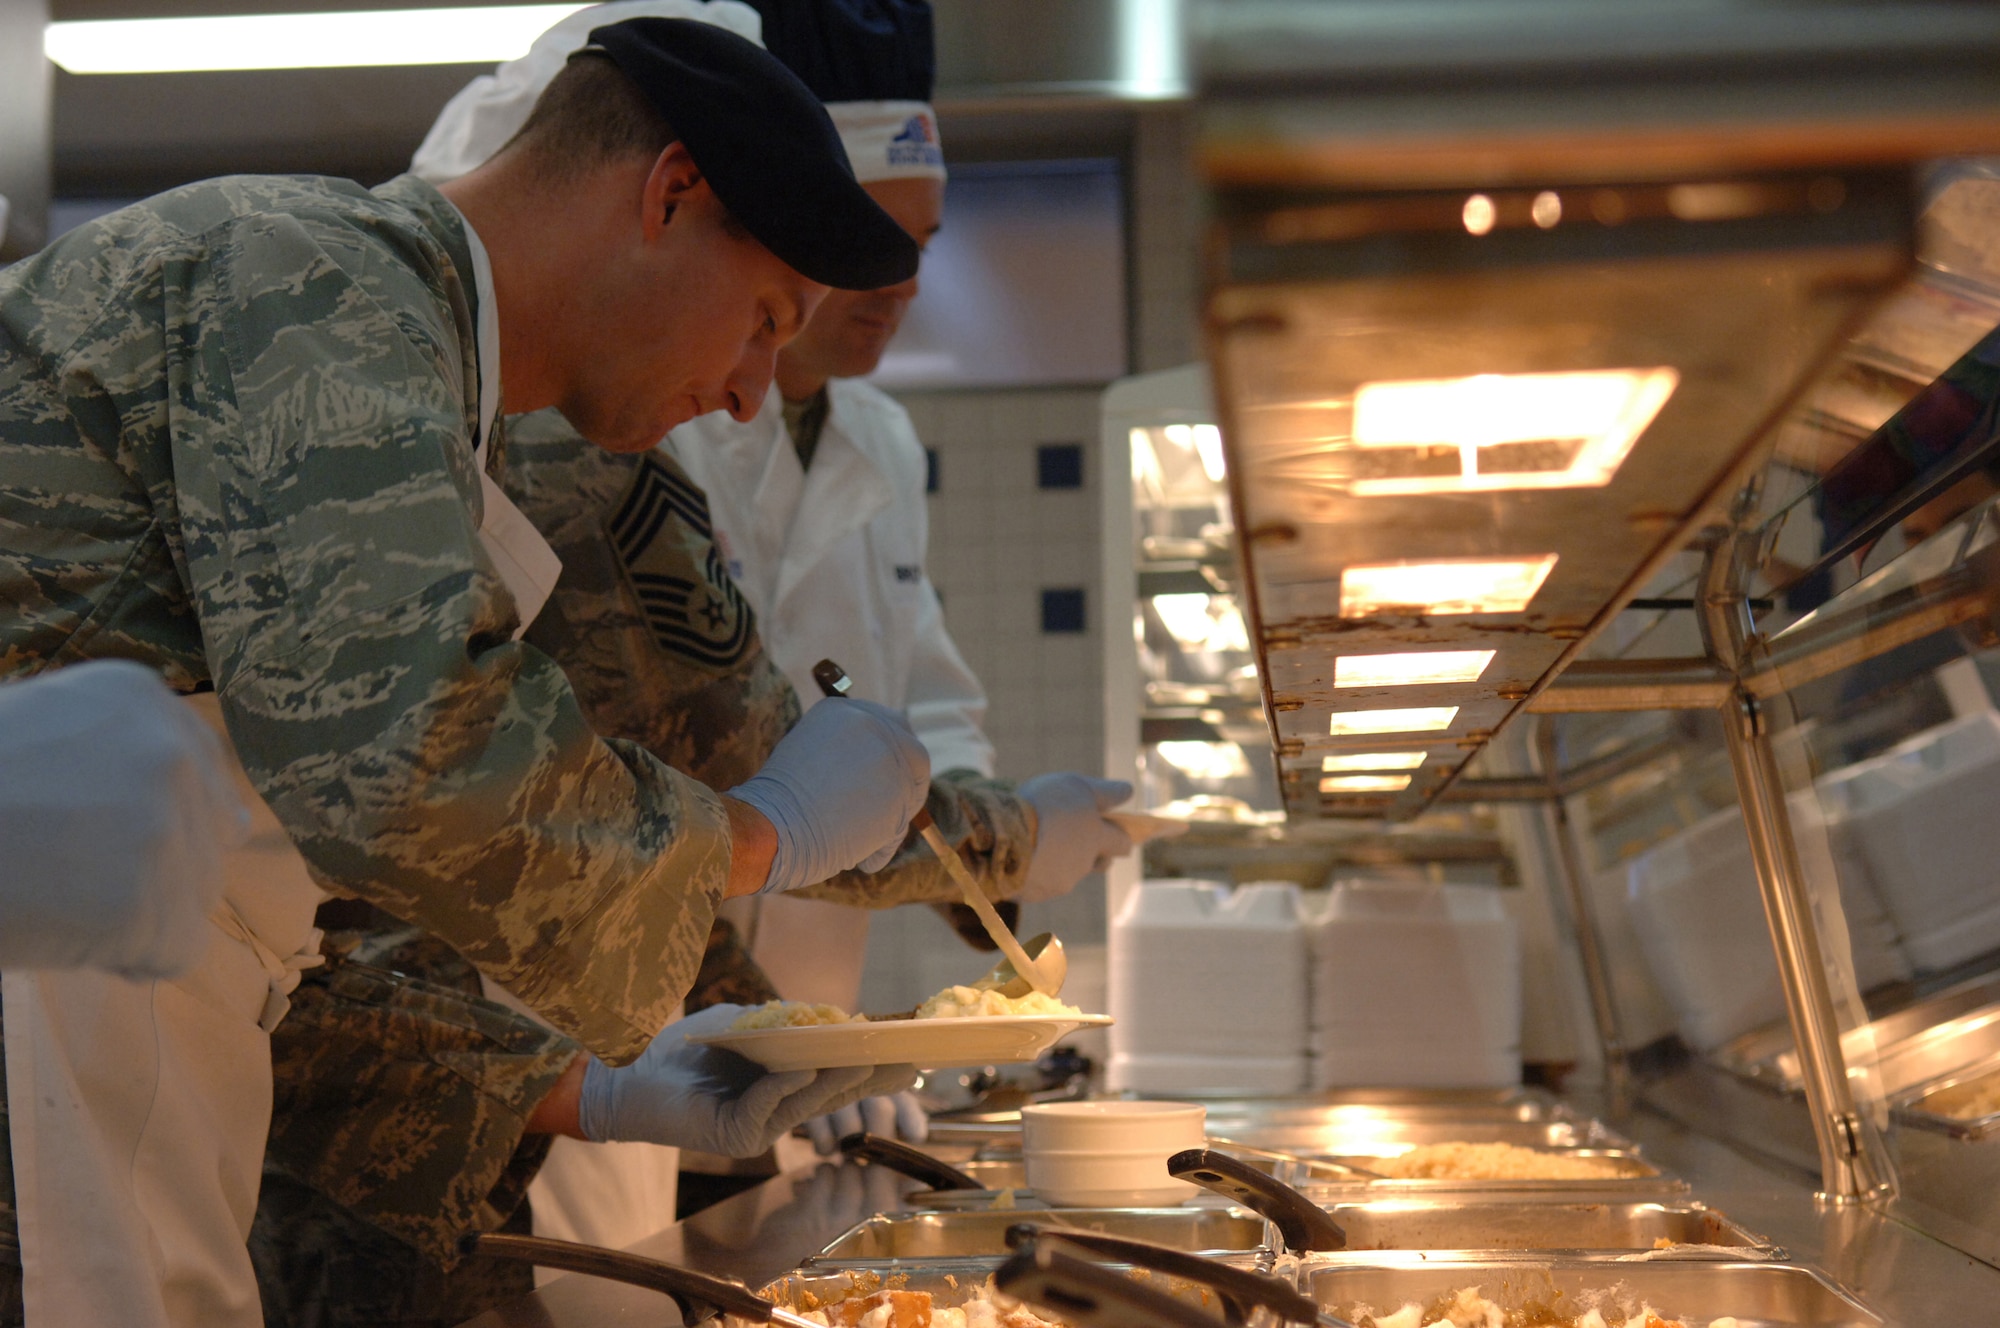 Capt. Justin Secrest, 769th United States Forces Protection Squadron commander, pours gravy on mashed potatoes for a patron of the Lindberg Hof Dining Facility during Thanksgiving meal, Kapaun Air Station, Germany, Nov. 27, 2008. (U.S. Air Force photo by Senior Airman Levi Riendeau)